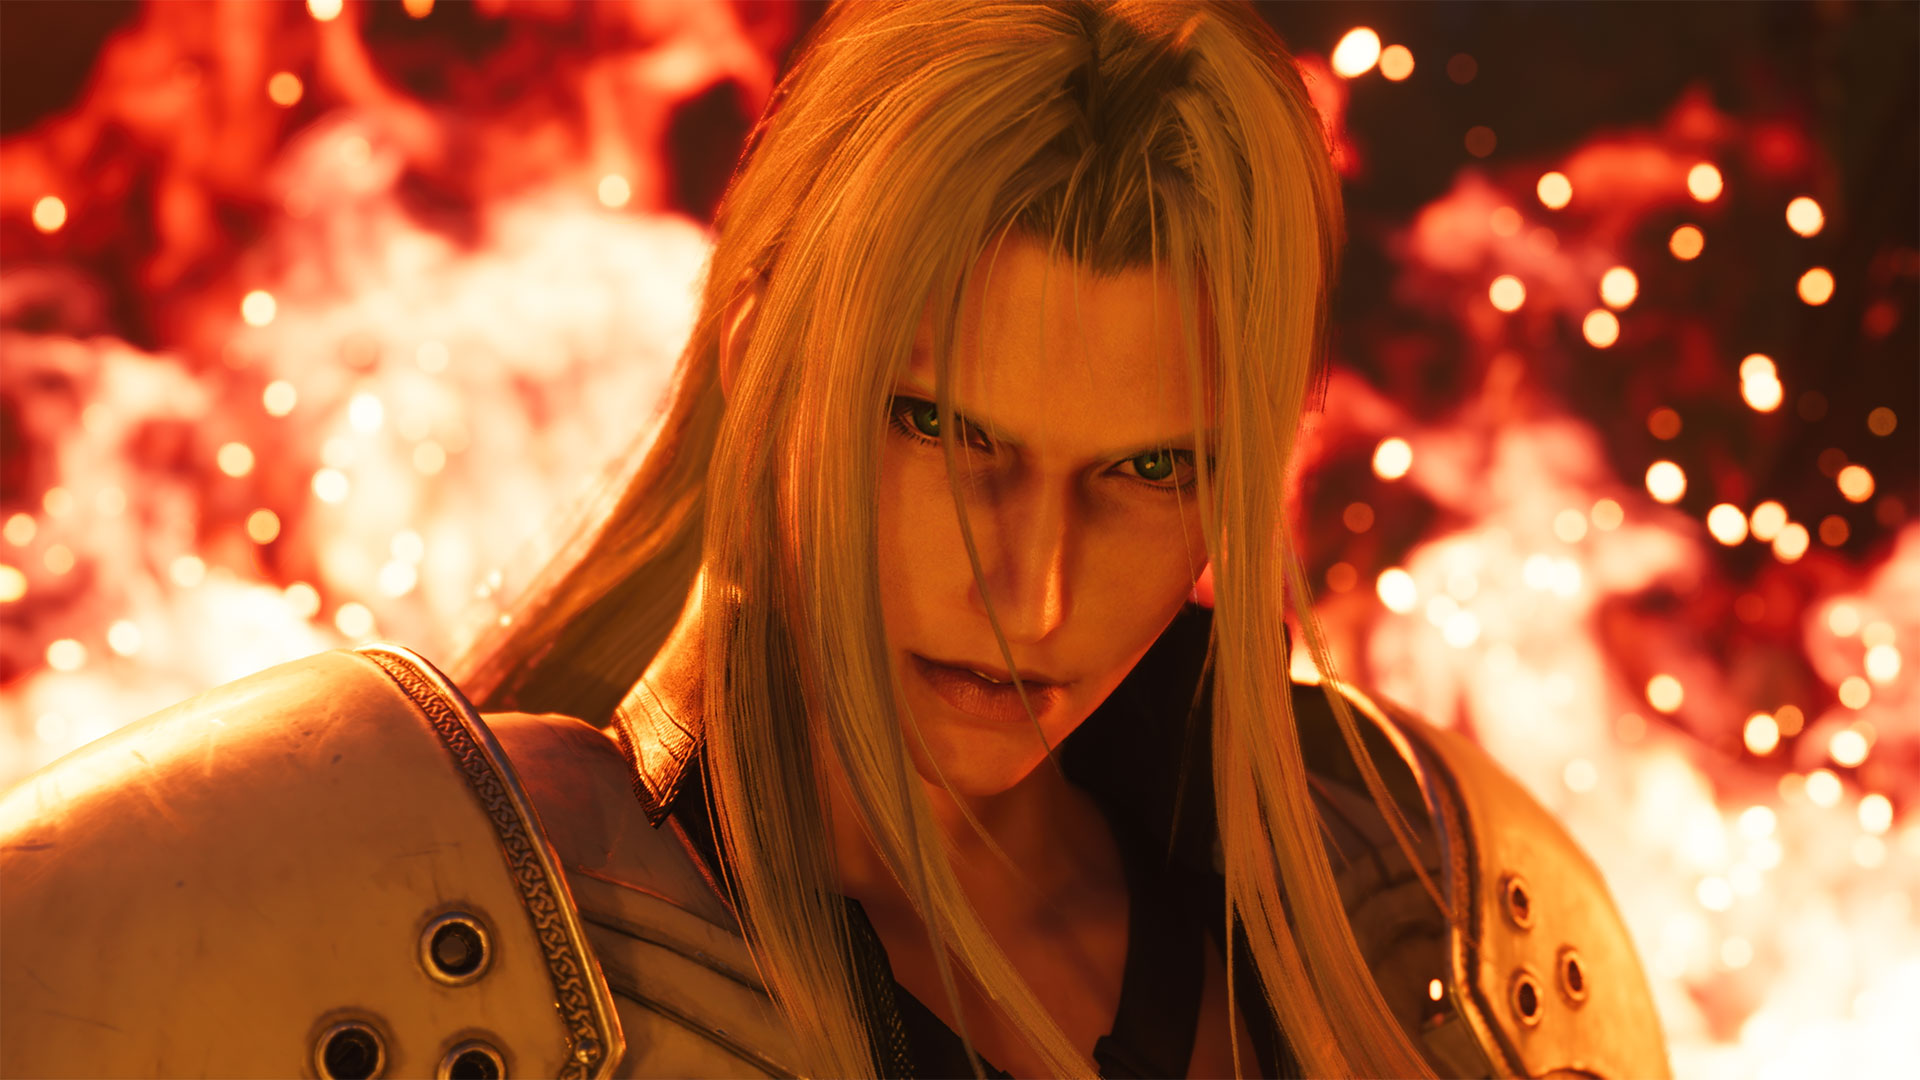 Final Fantasy VII Rebirth launches exclusively on PlayStation 5 on February 29